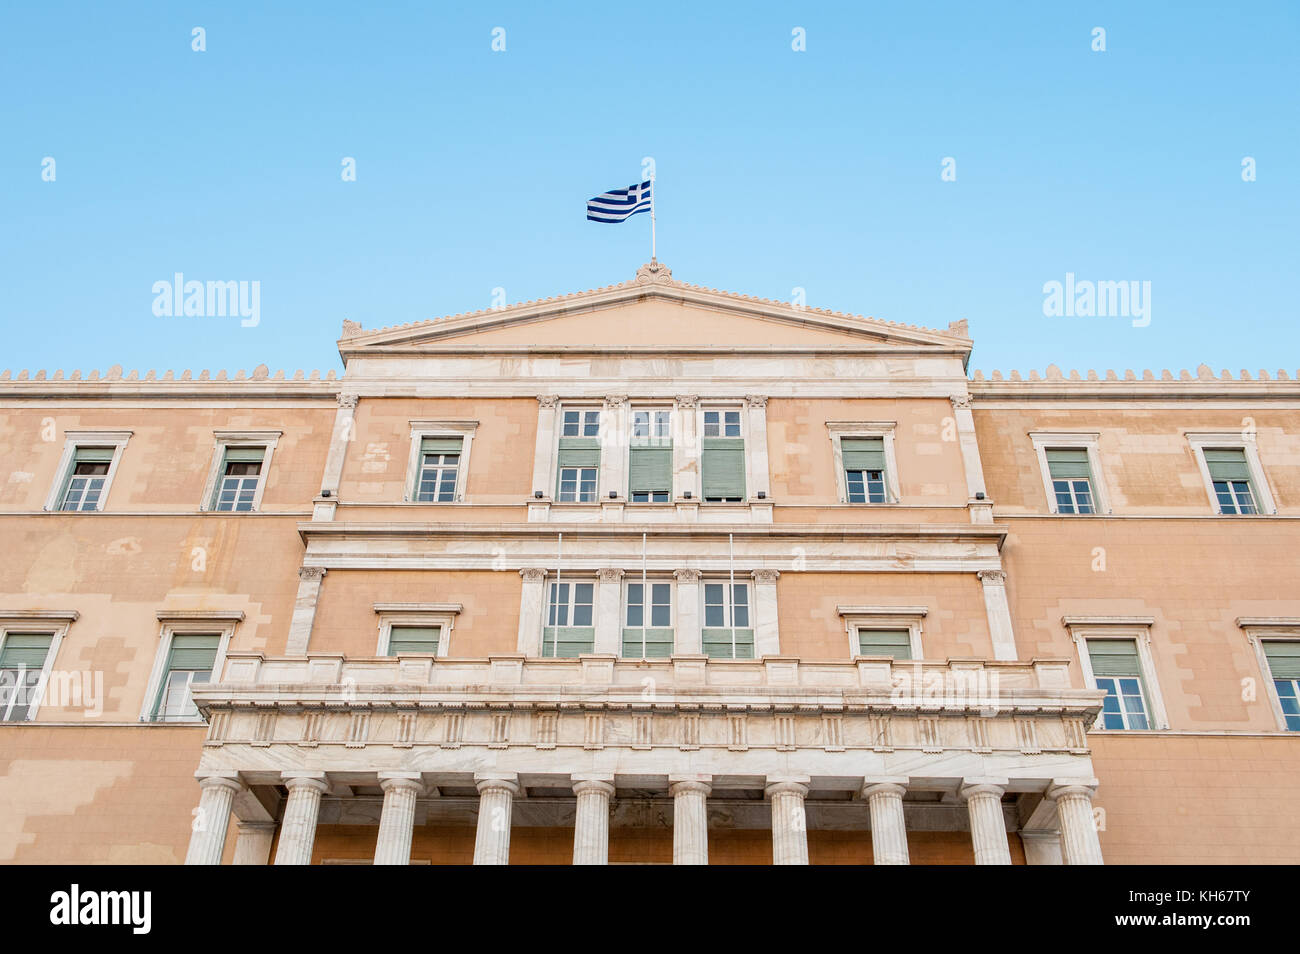 The Old Royal palace housing the Greek Parliament at Syntagma square in Athens, Greece Stock Photo